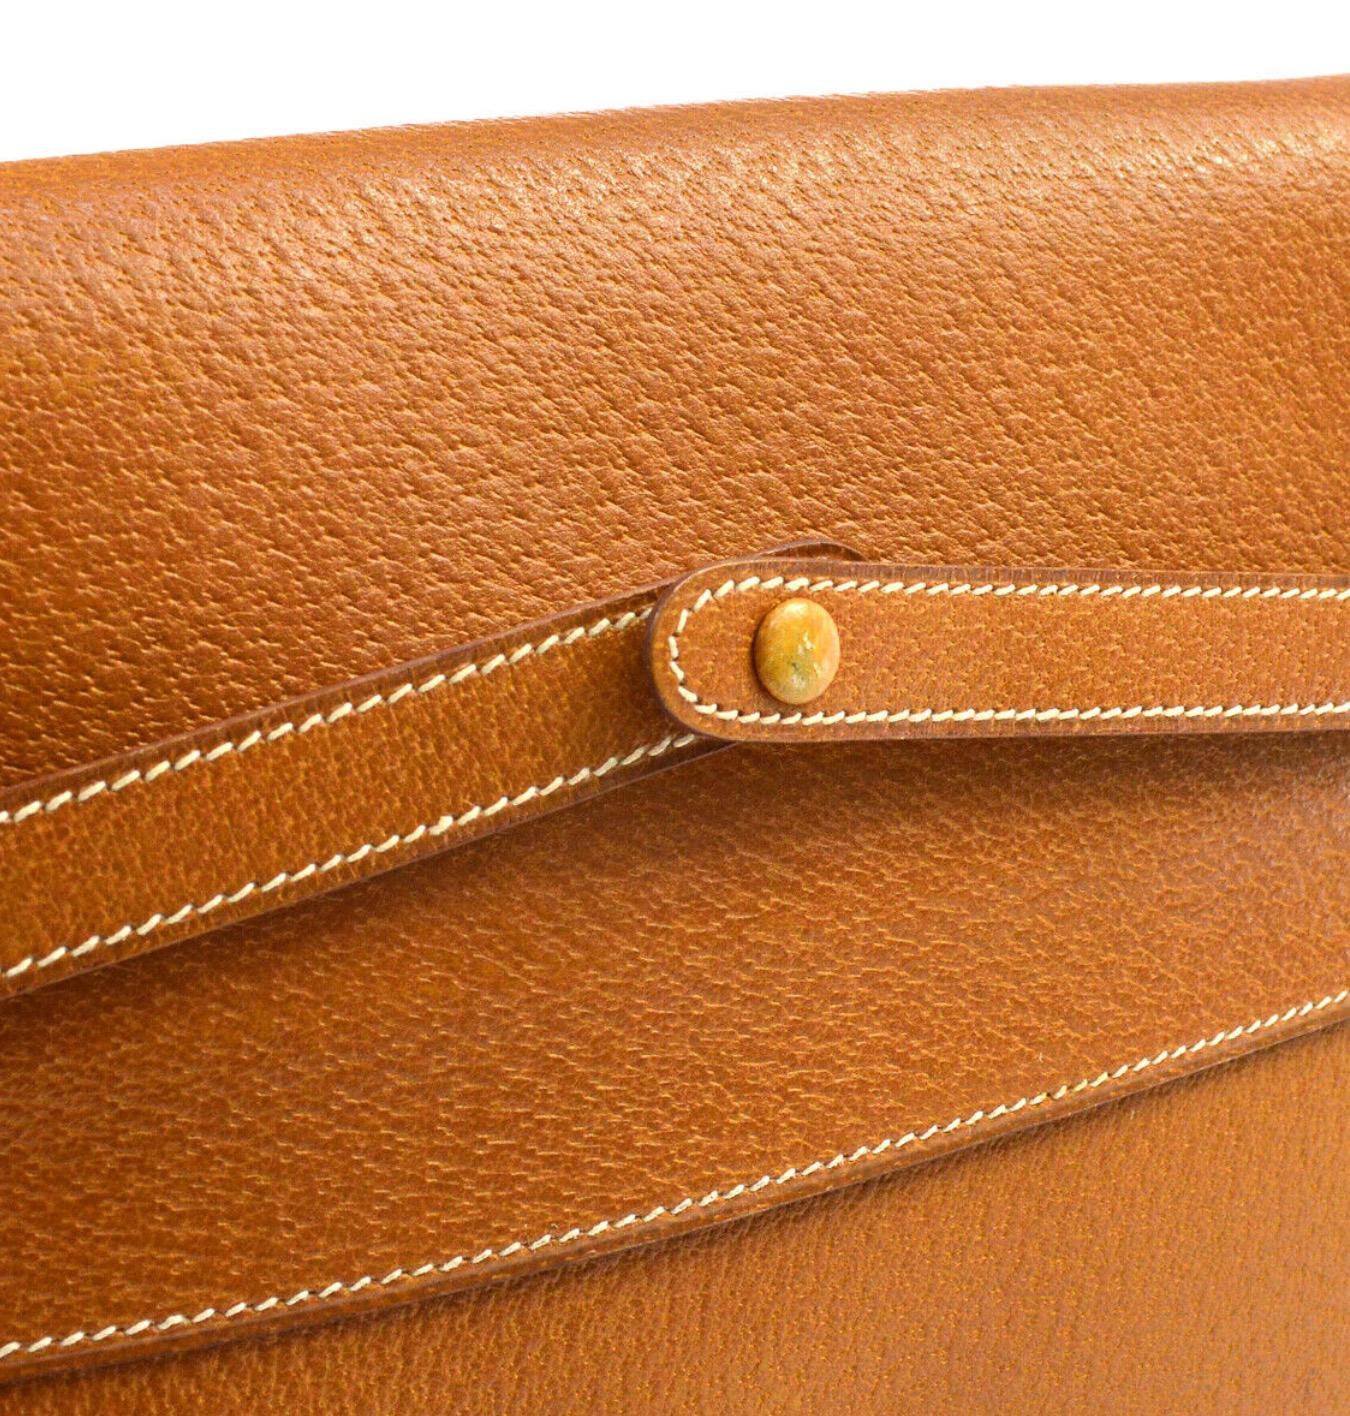 Leather
Leather lining
Gold tone hardware
Snap button closure
Made in France
W 9.4 x H 7.9 x D 0.6 